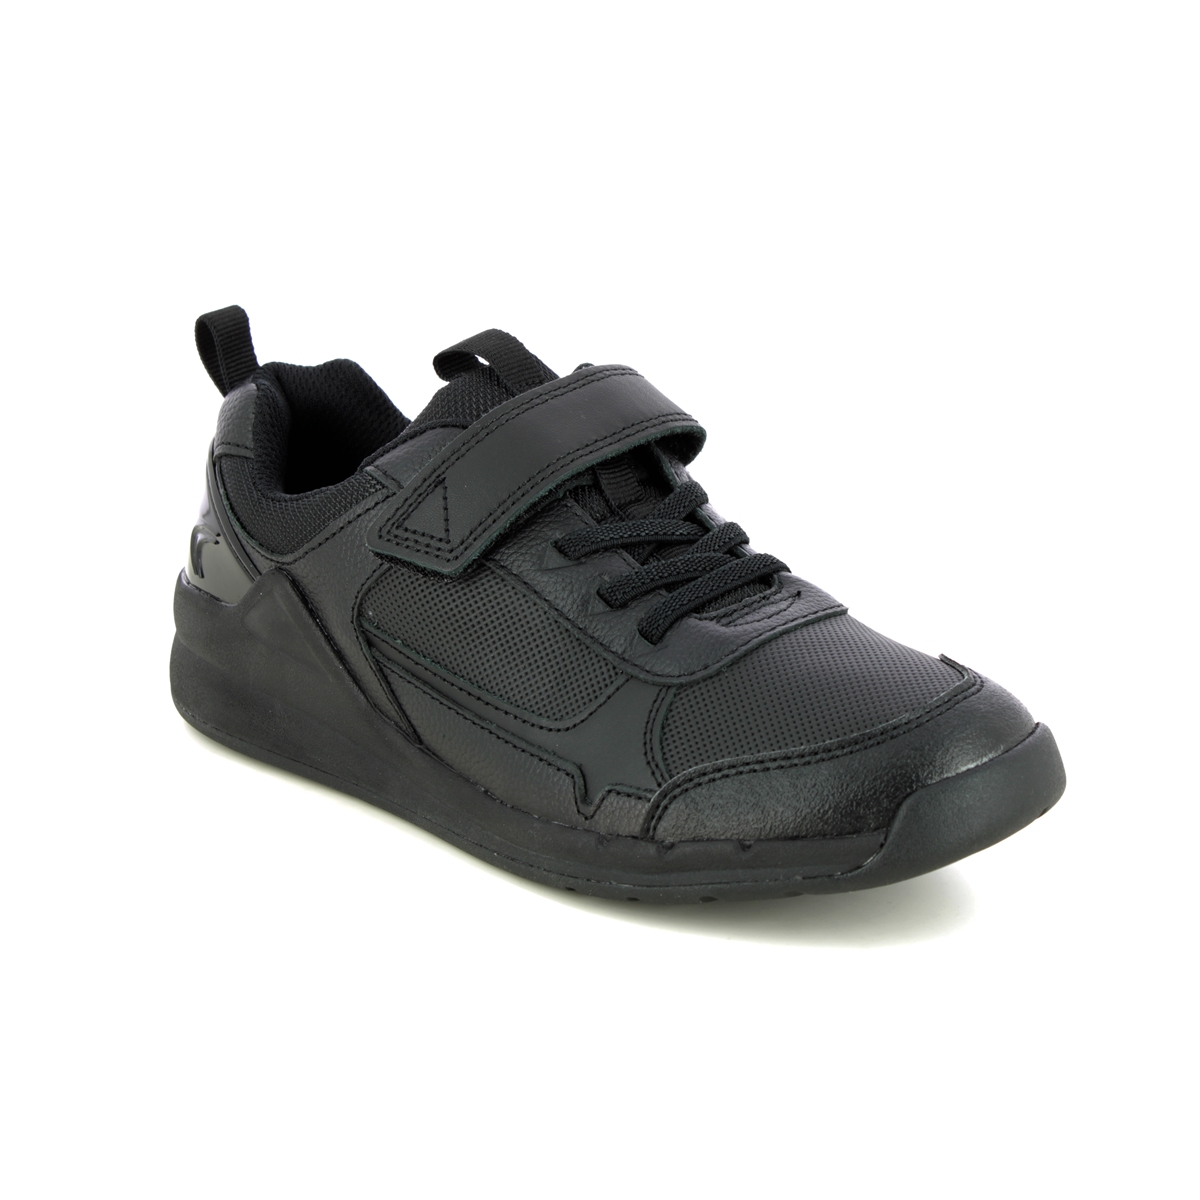 Clarks Orbit Sprint Y Black Leather Kids Boys Shoes 534746F In Size 4.5 In Plain Black Leather F Width Fitting Regular Fit For School For kids